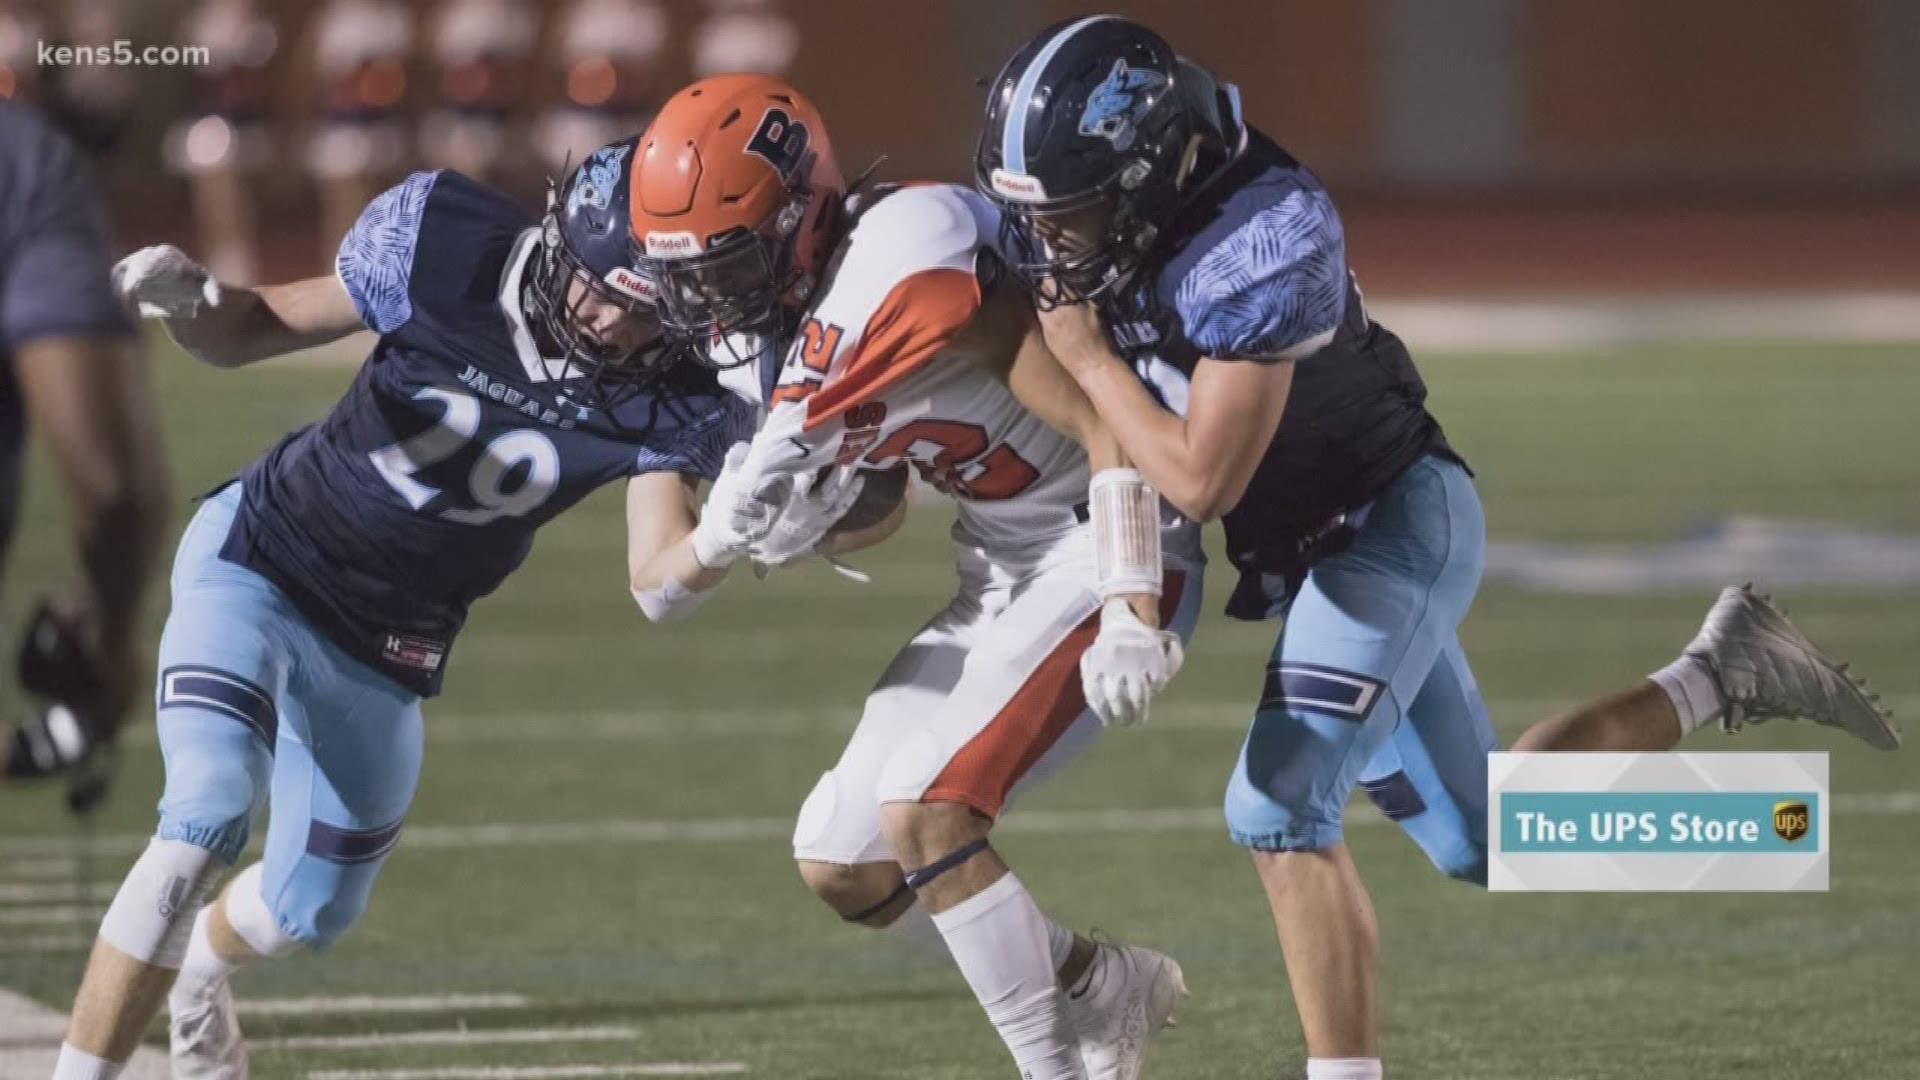 A second Peanut Butter Bowl? Brandeis vs. Johnson, Part 2 is one of many great playoff matchups in the opening round.